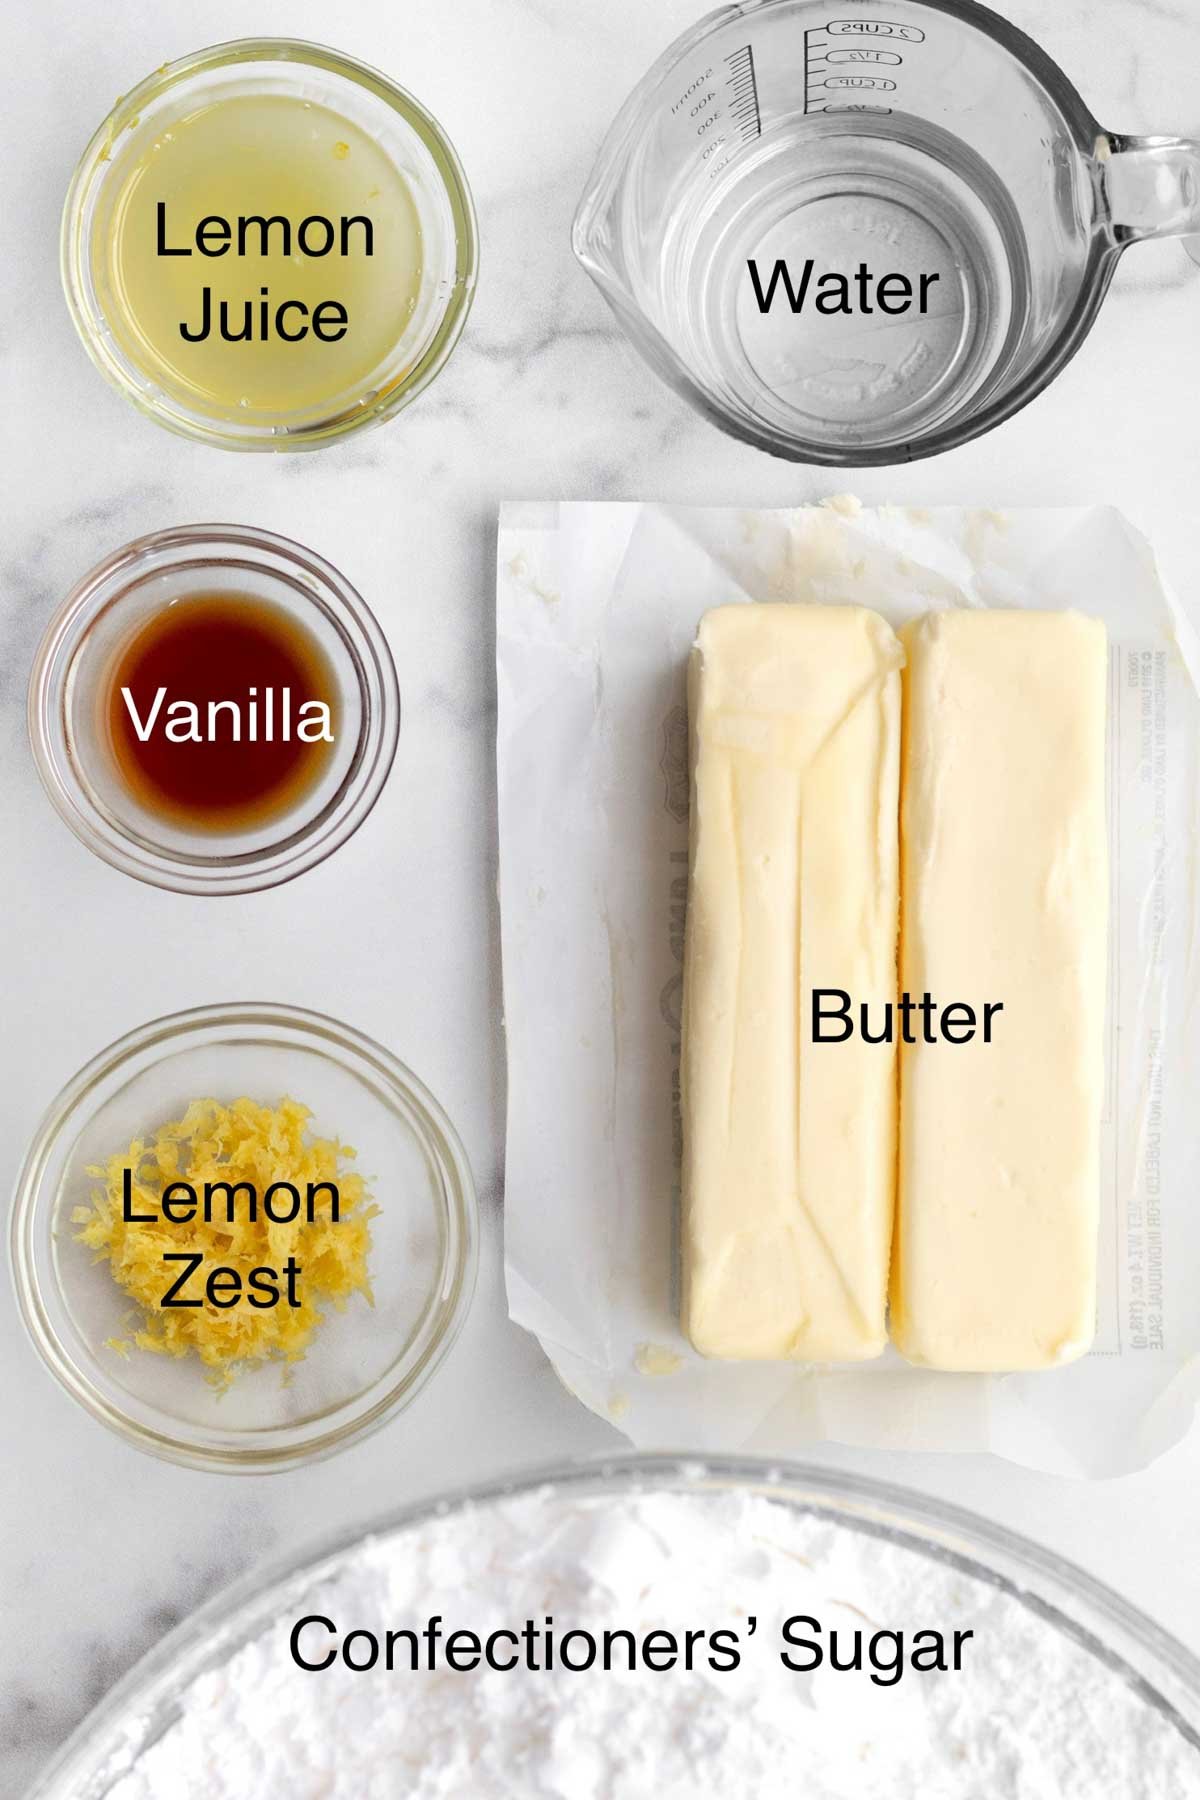 Lemon juice, water, vanilla, butter, lemon zest and confectioners' sugar all in separate containers.